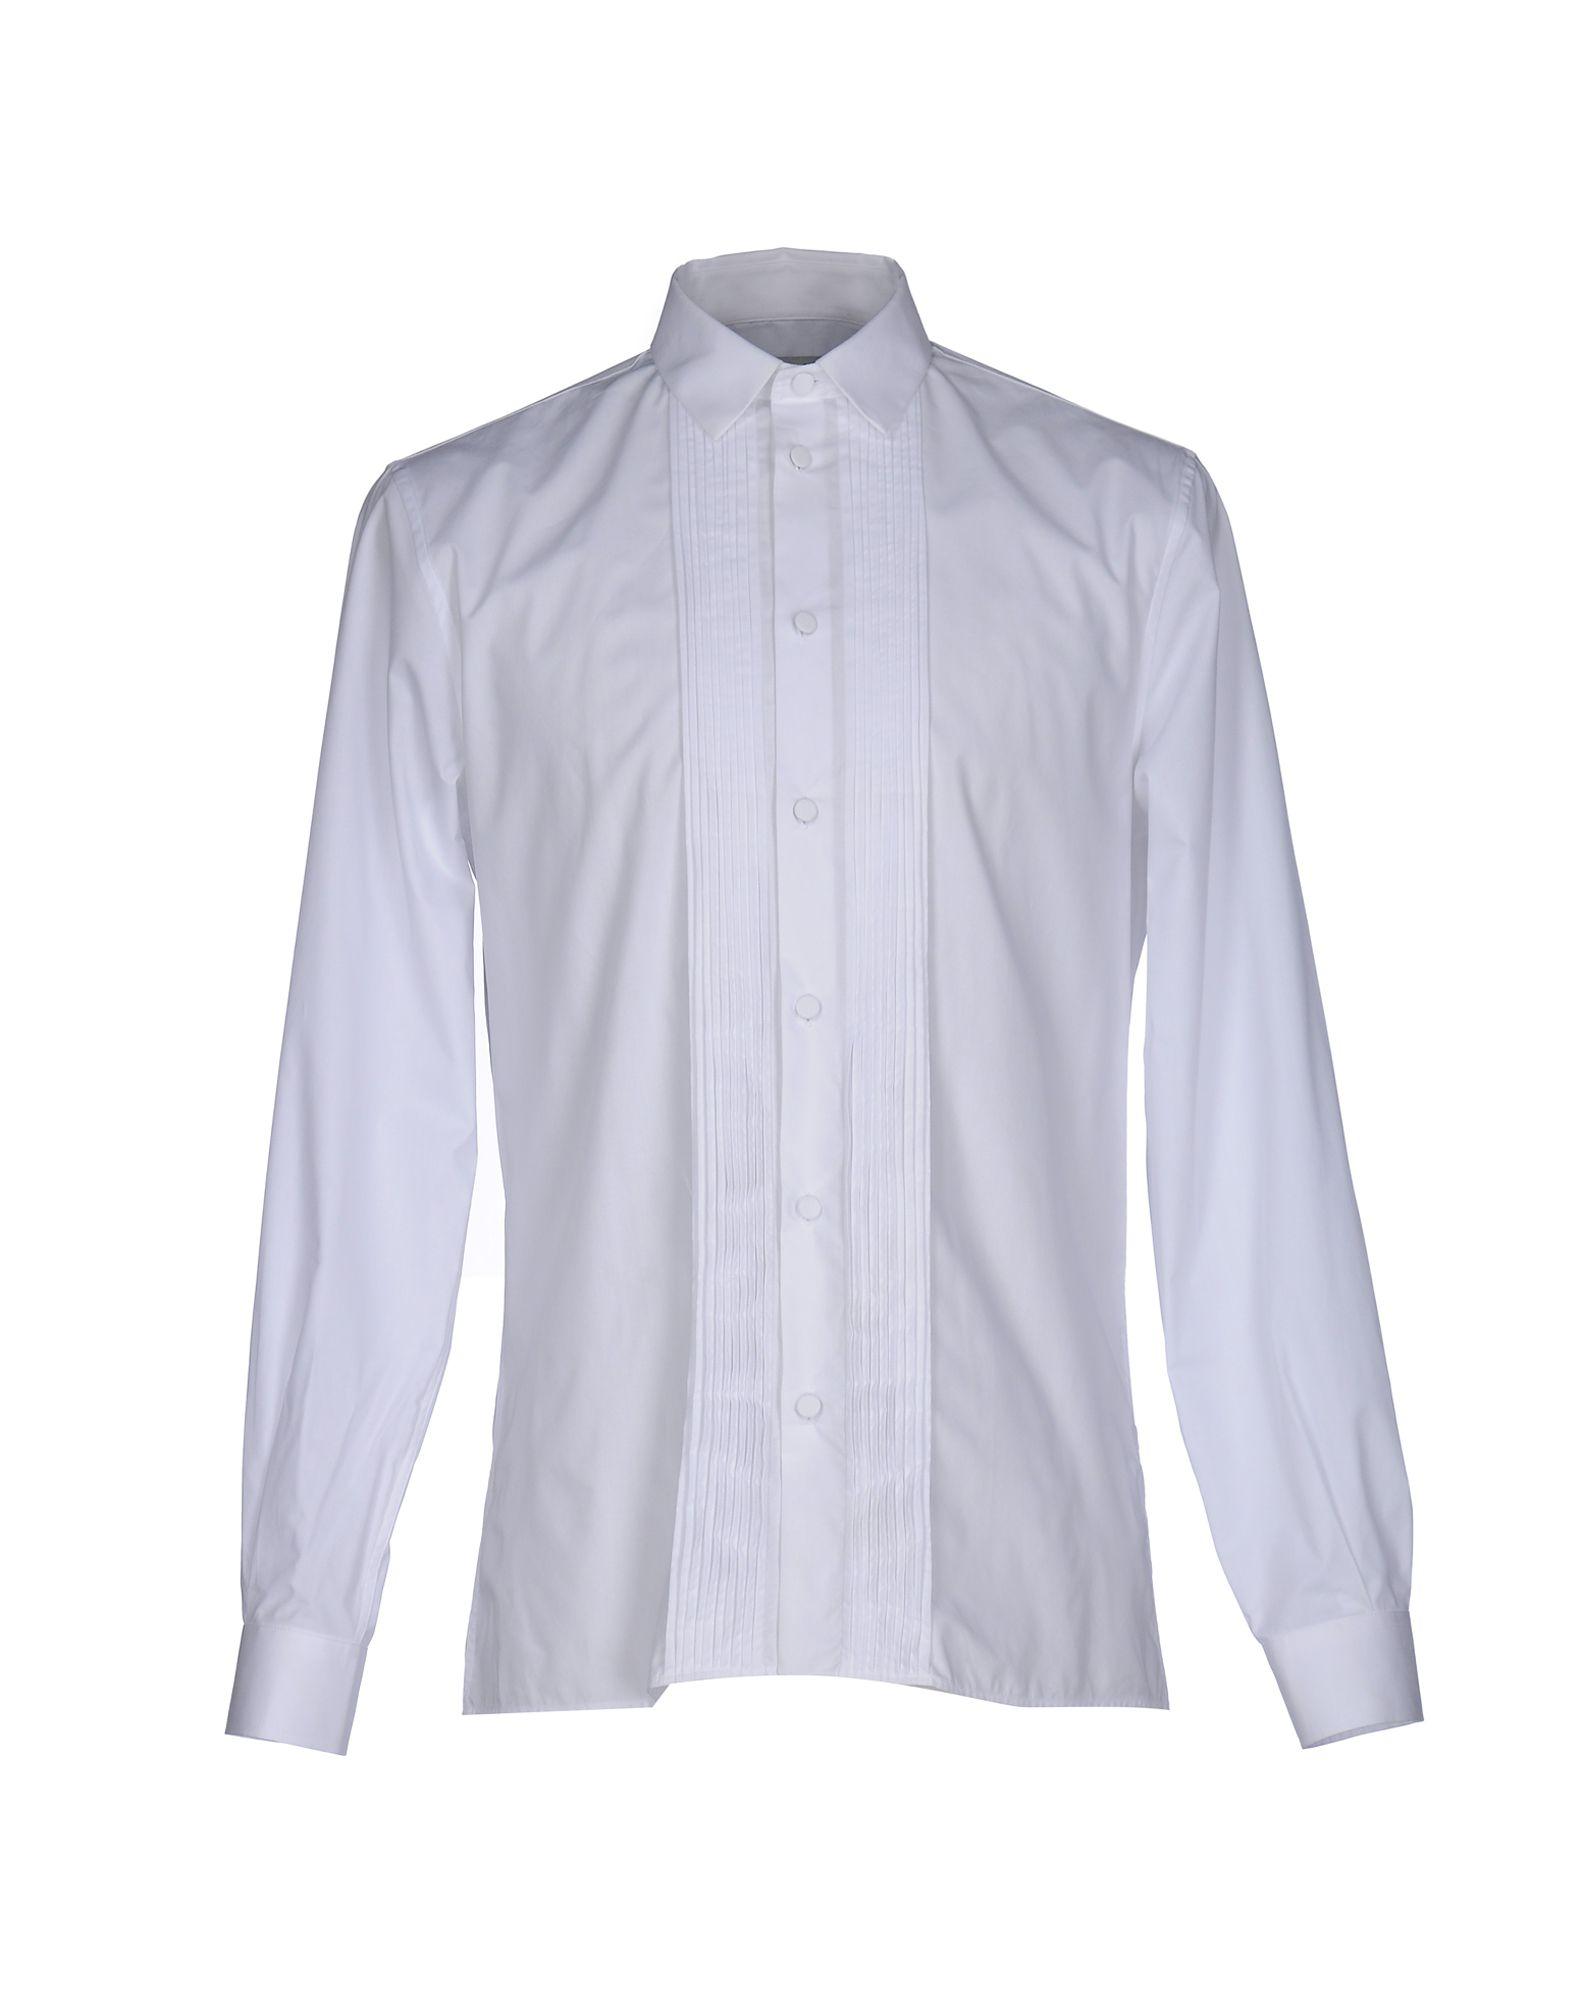 Lyst - Éditions Mr Shirt in White for Men